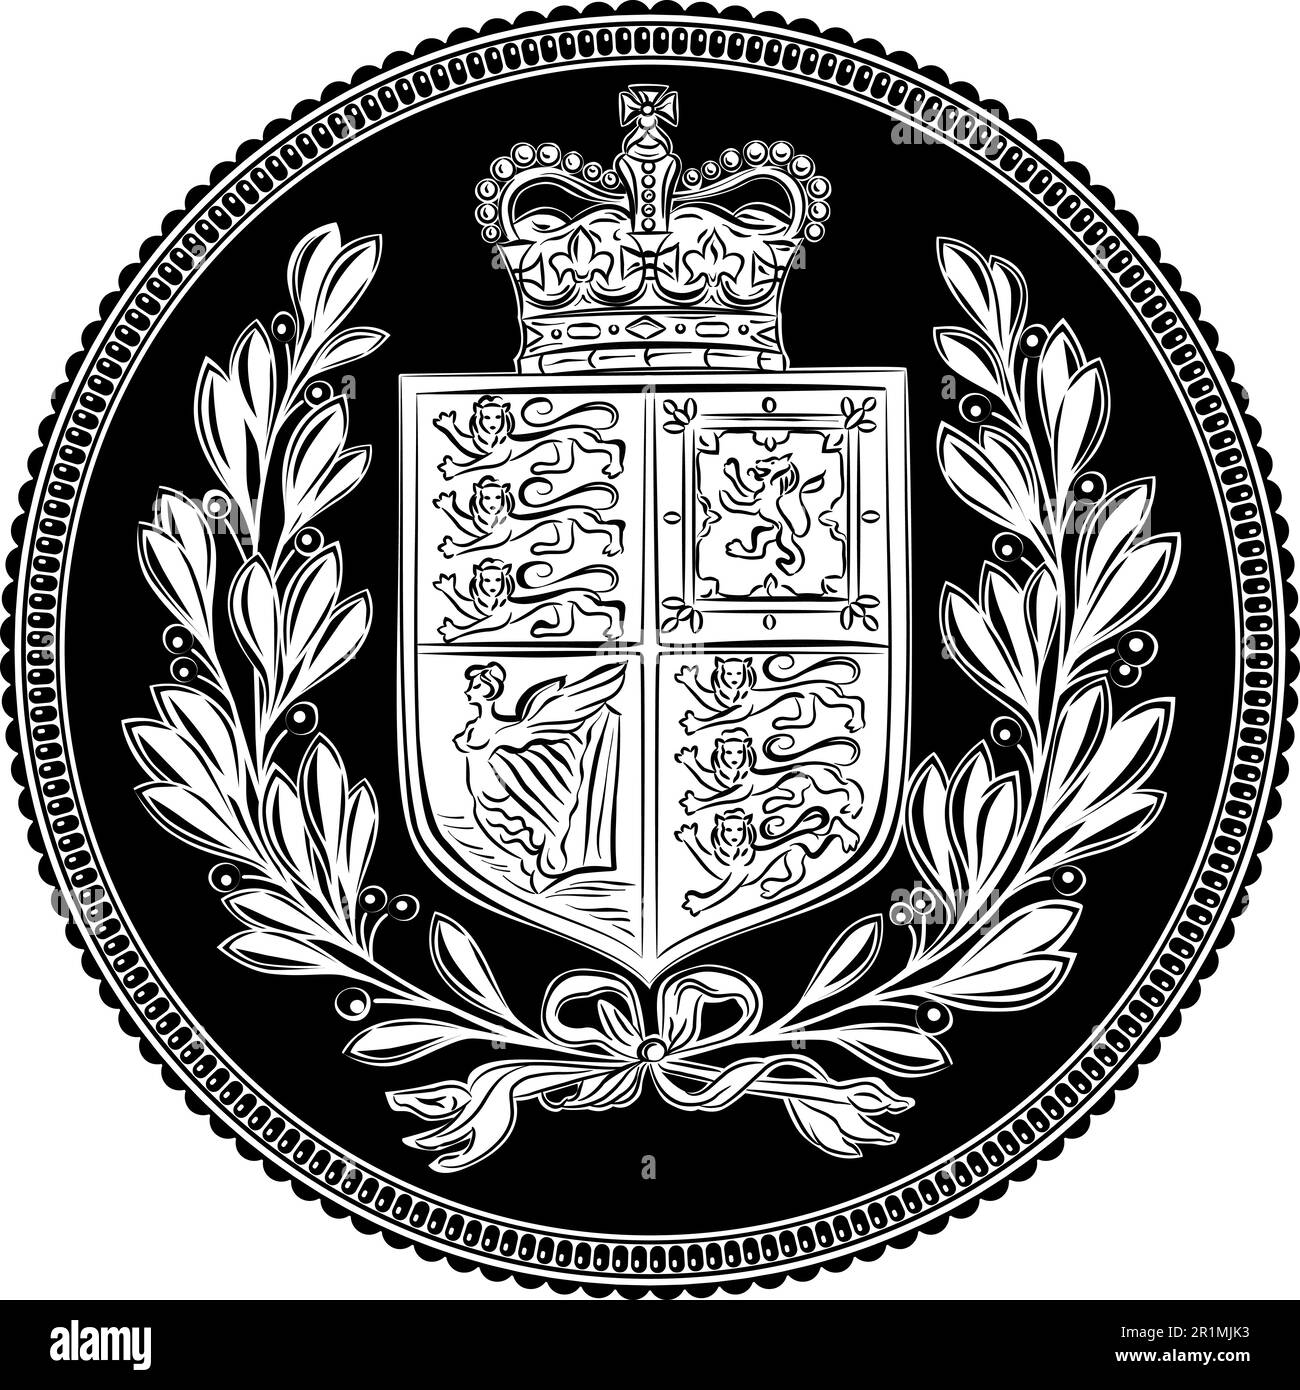 British money gold coin Sovereign with crown, coat of arms in laurel wreath, black and white Stock Vector